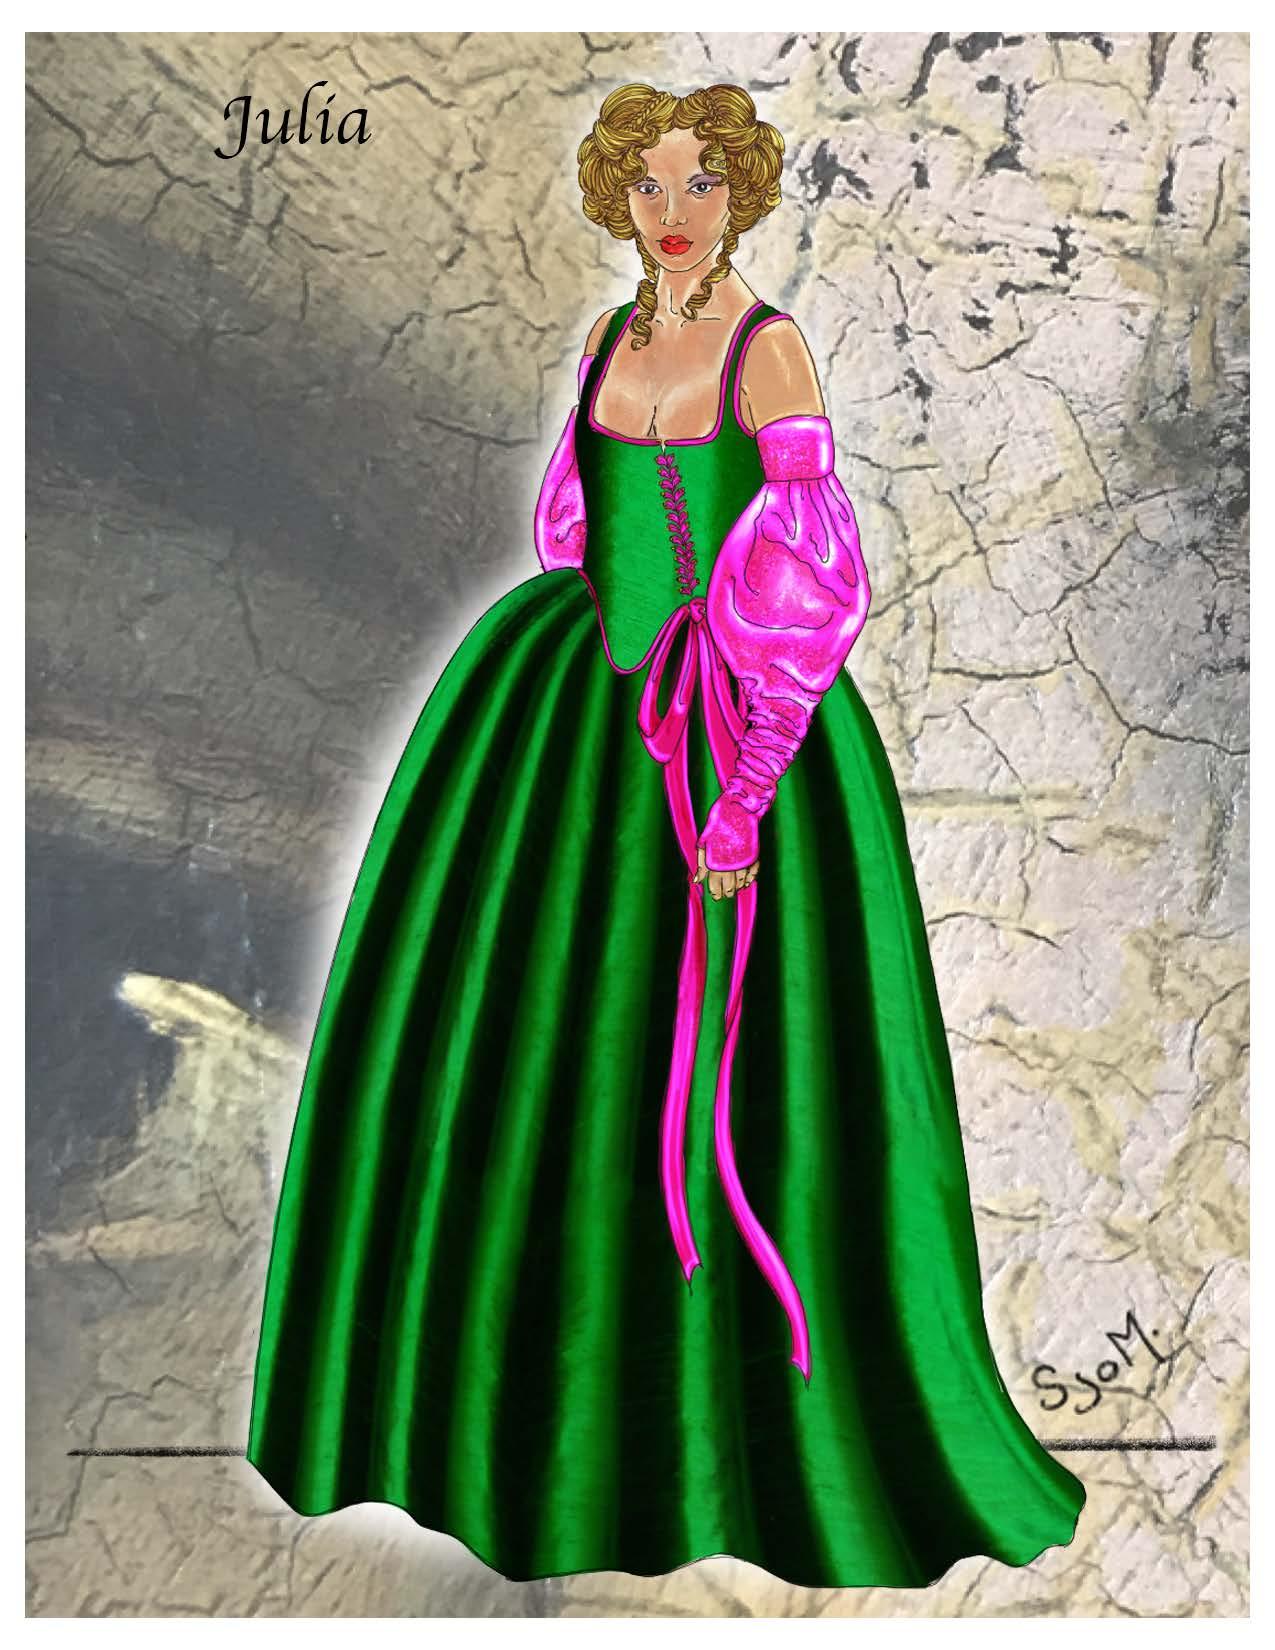 illustration of a woman in a shiny green and pink gown with wide skirt and corset, and arm-length fingerless goves which puff around the elbow